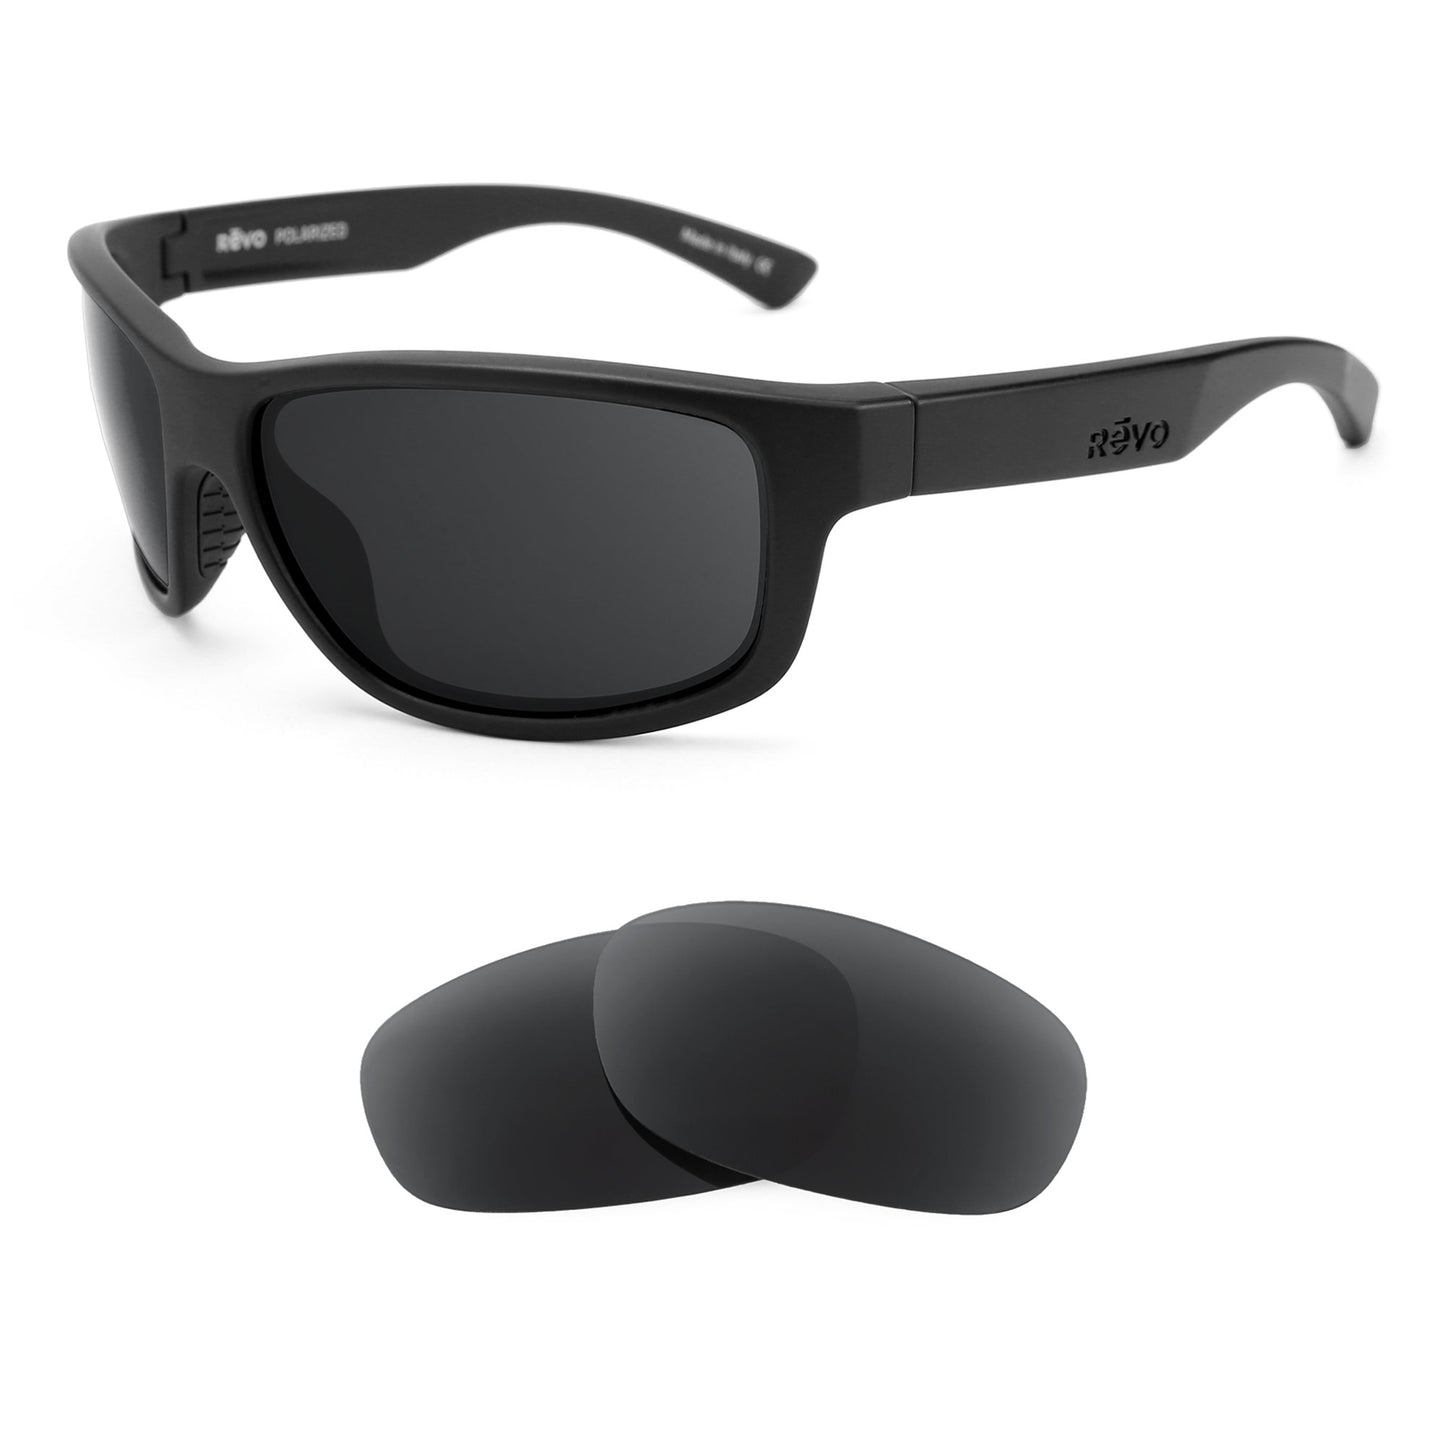 Revo Baseliner sunglasses with replacement lenses